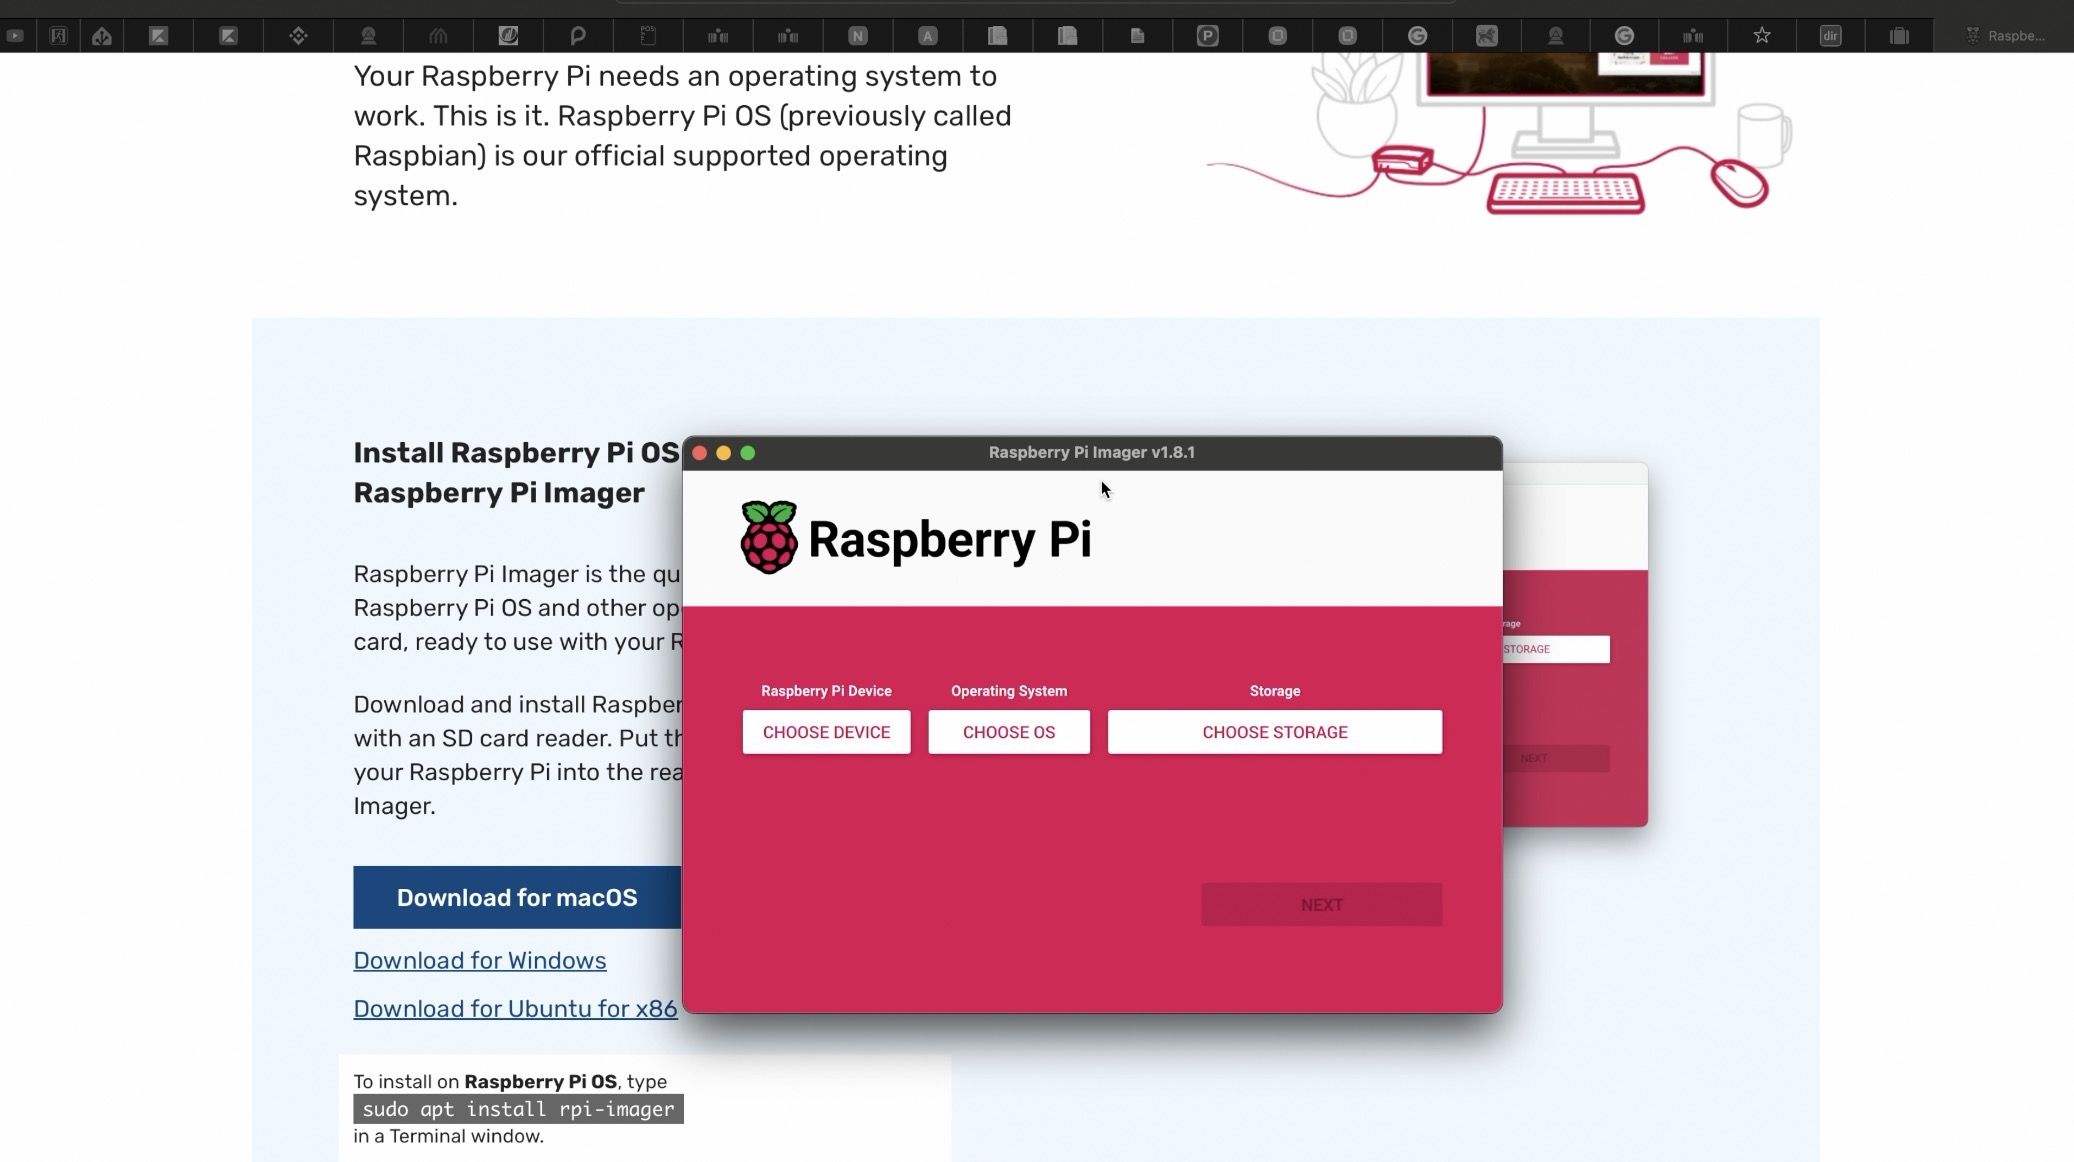 Raspberry Pi Imager can be started on Windows, Mac & Linux